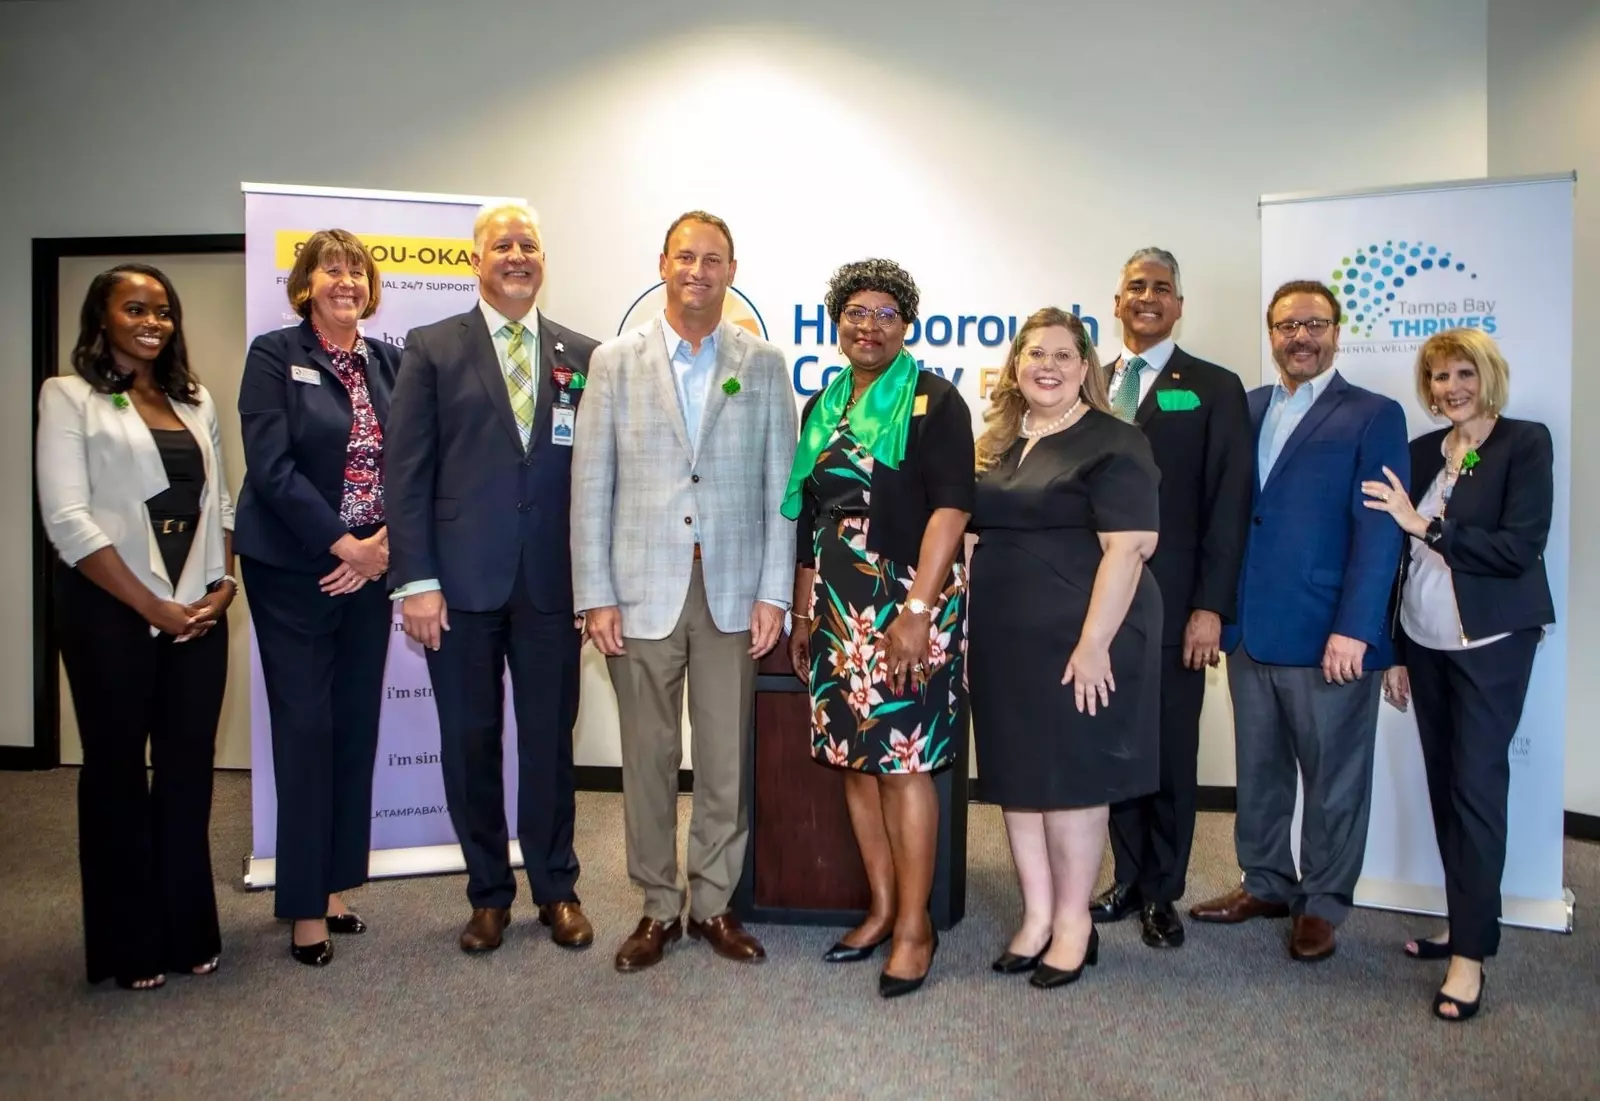 AdventHealth and community leaders with Tampa Bay Thrives